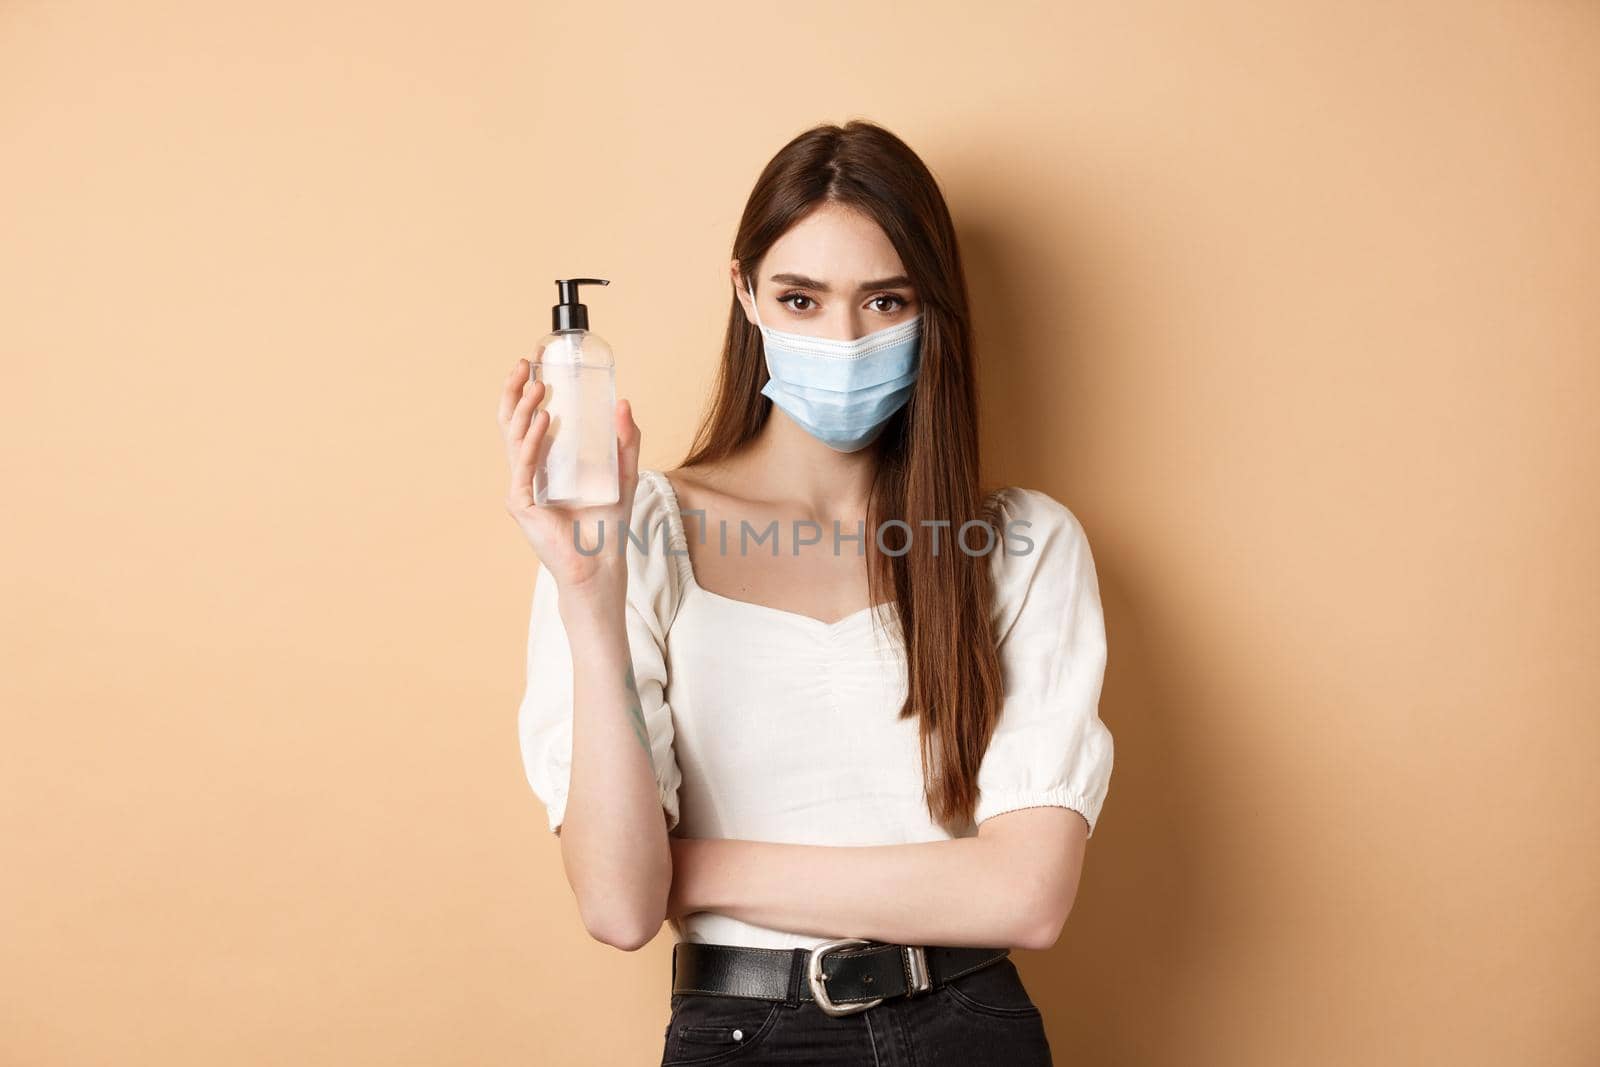 Pandemic and healthcare concept. Serious woman concerned about covid-19, wearing medical mask and showing bottle of hand sanitizer, standing on beige background.